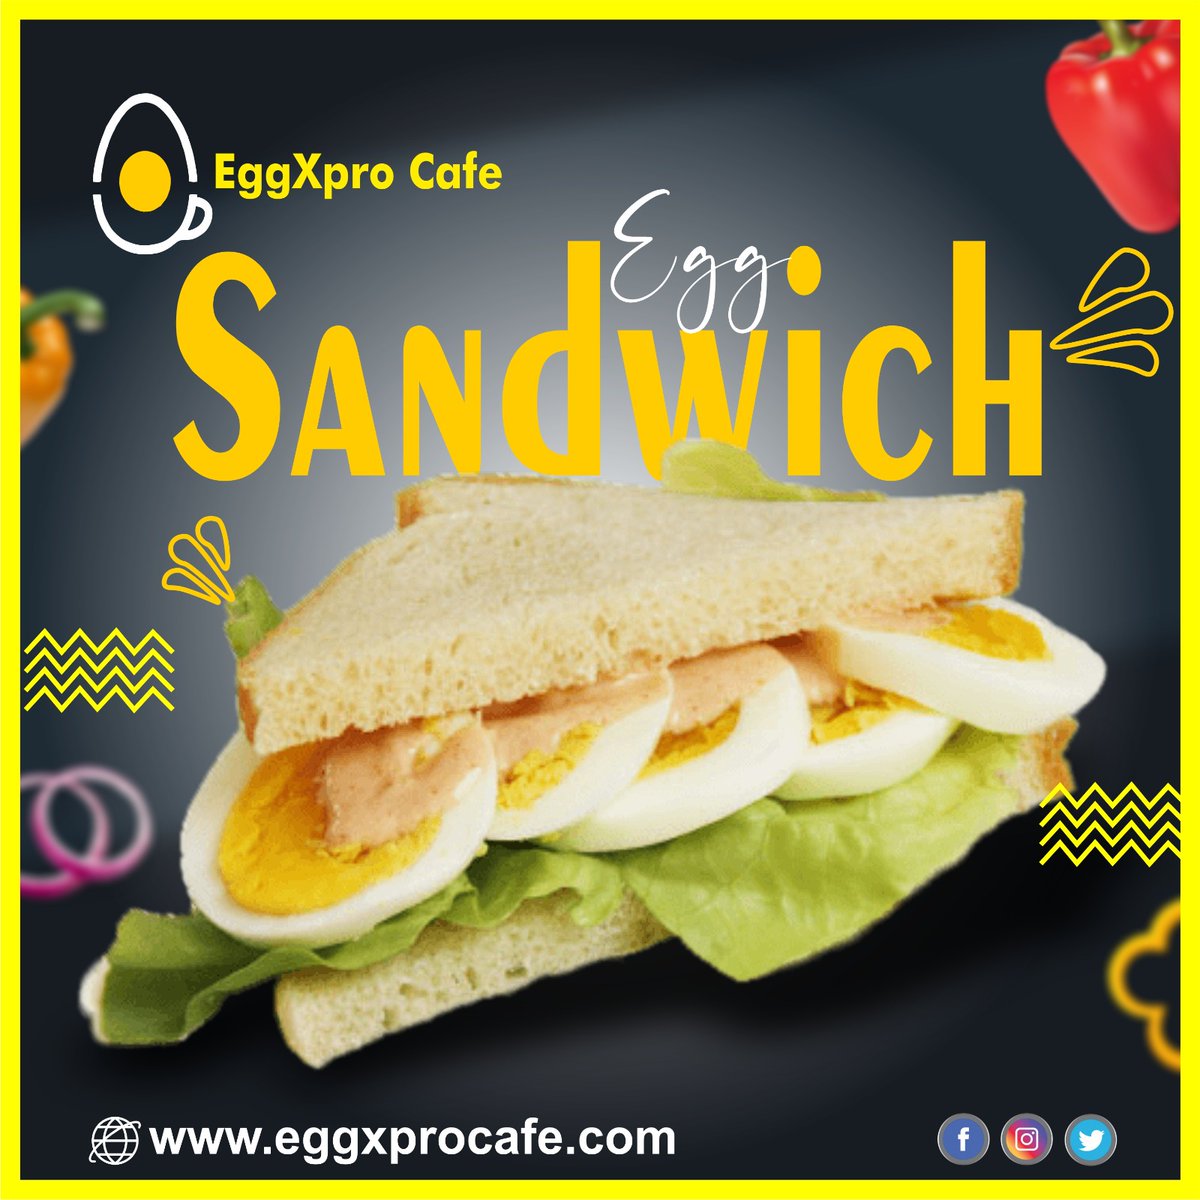 A breakfast without eggs is just incomplete, Egg Sandwich you in on a Healthy Food, eggs are the best breakfast👍
.
#eggroll #eggrolls #eggsandwich #eggpizza #freshingredients #eggdishes #friends #eggrolls #omelette #indianfood #eggxprocafefranchise #eggxprocafe #foodie #eggfood